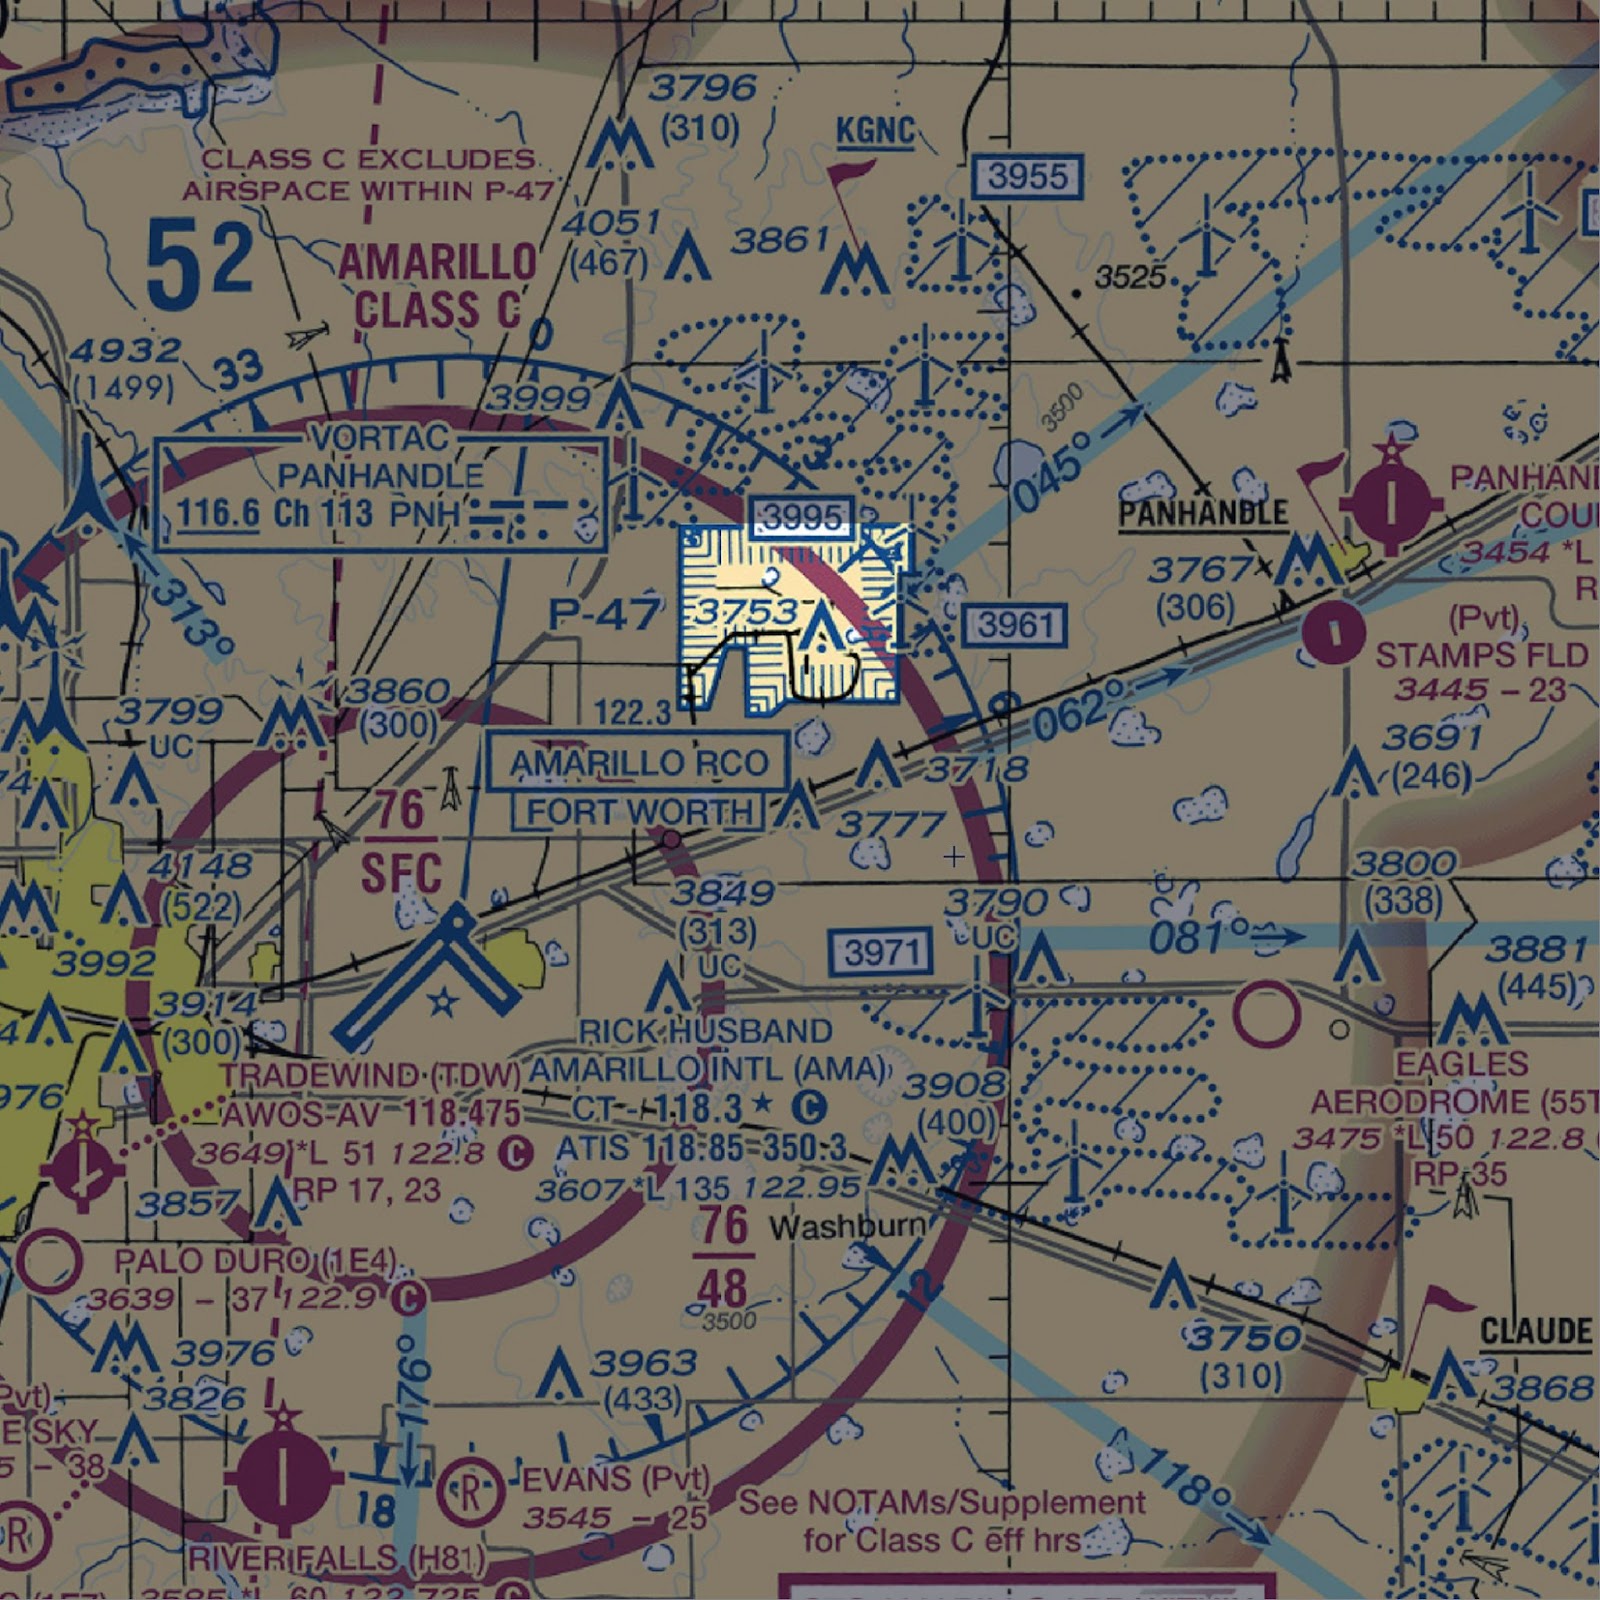 A diagram depicting prohibited airspace on a sectional chart.